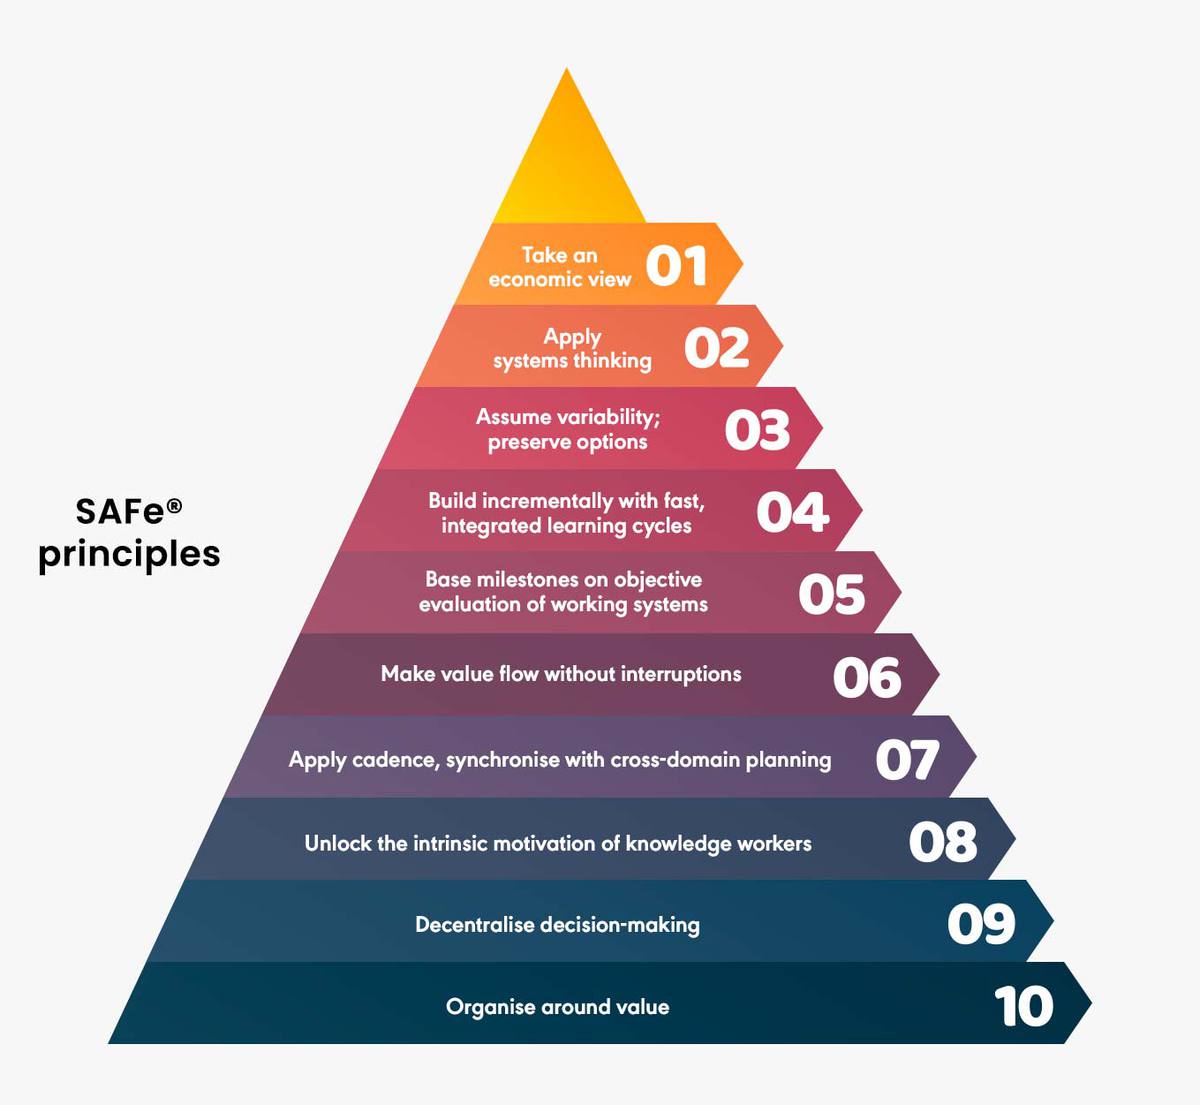 Layered pyramid graphic showing the 10 SAFe principles with one at the top and 10 at the bottom